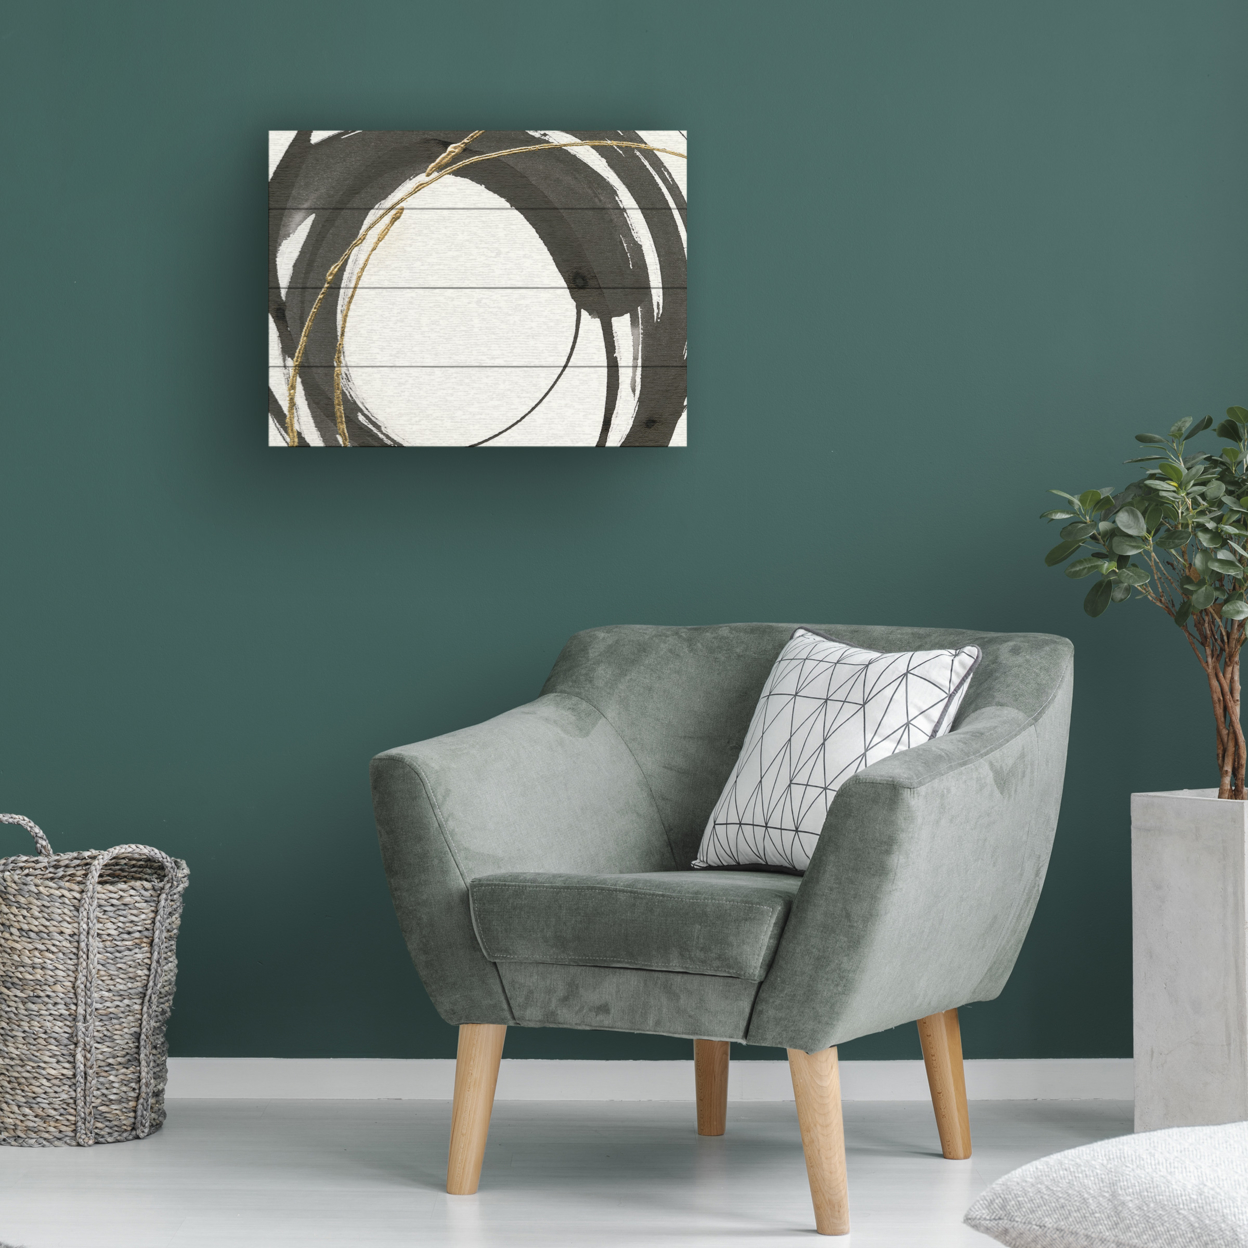 Wall Art 12 X 16 Inches Titled Gilded Enso IV Ready To Hang Printed On Wooden Planks